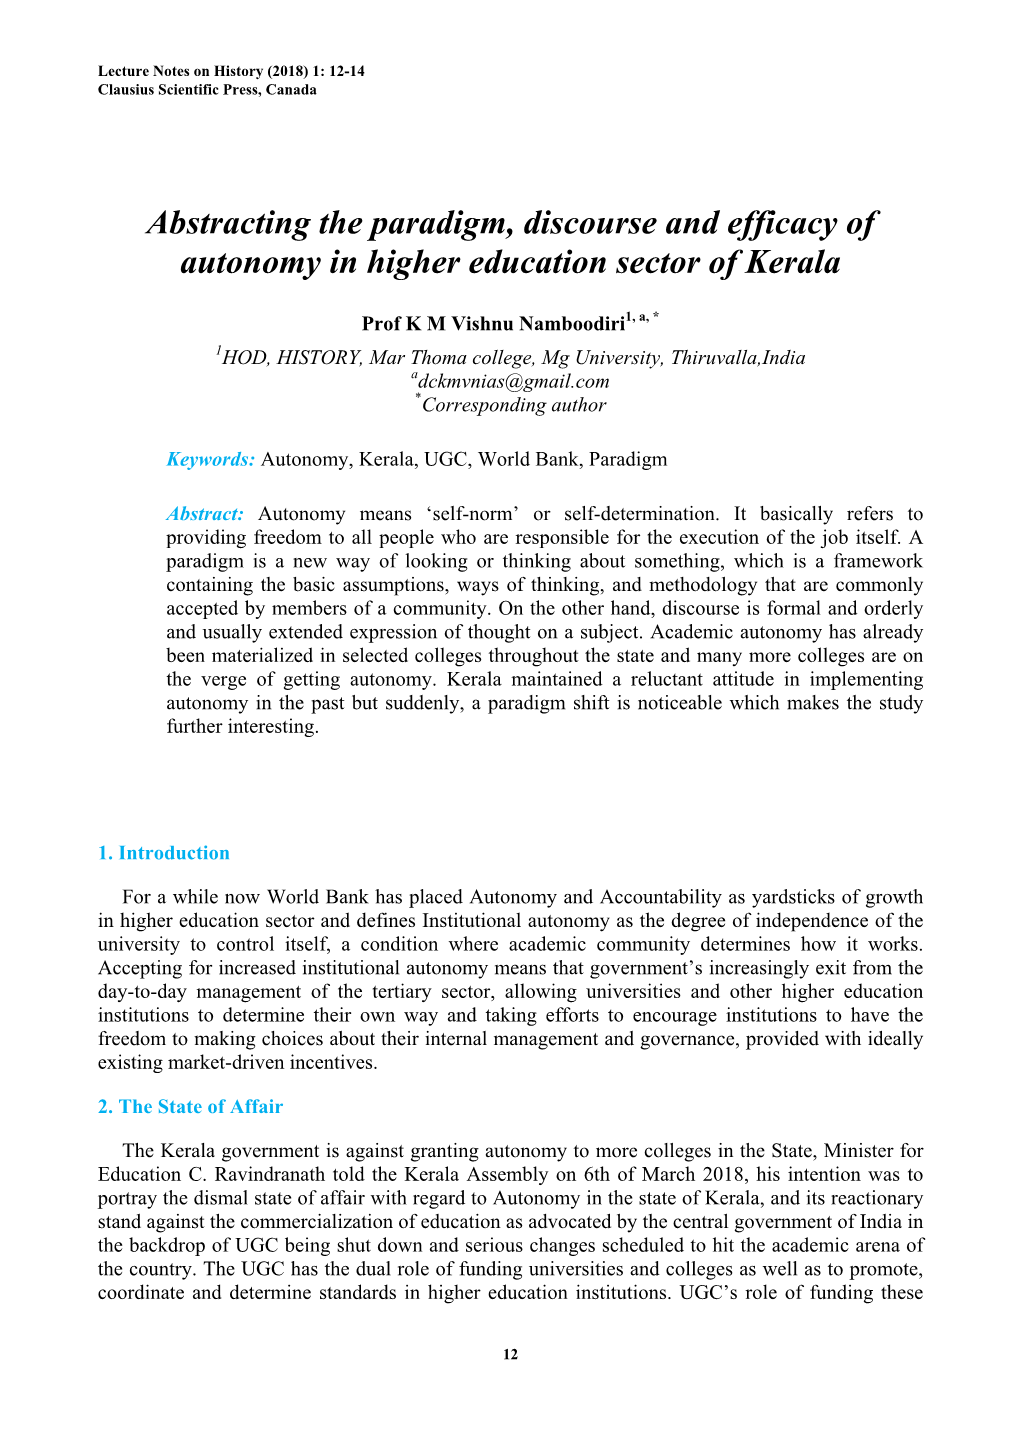 Abstracting the Paradigm, Discourse and Efficacy of Autonomy in Higher Education Sector of Kerala